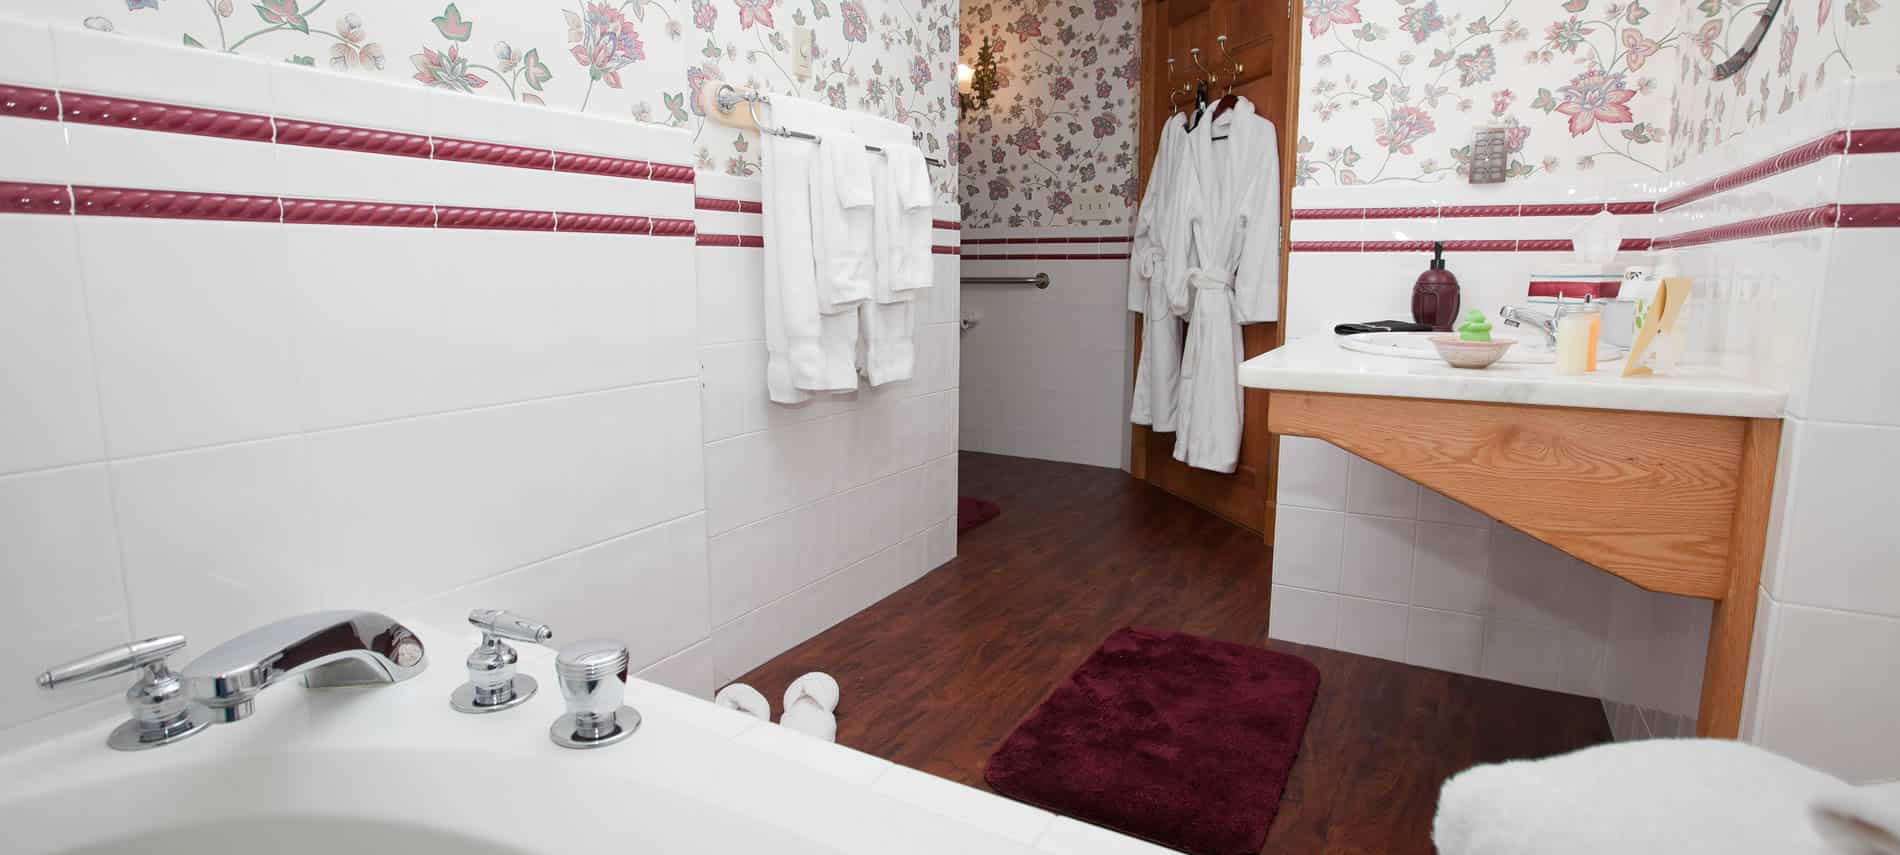 Prince Albert guest bath with white walls and floral wallpaper, tub and sink with hanging white robes